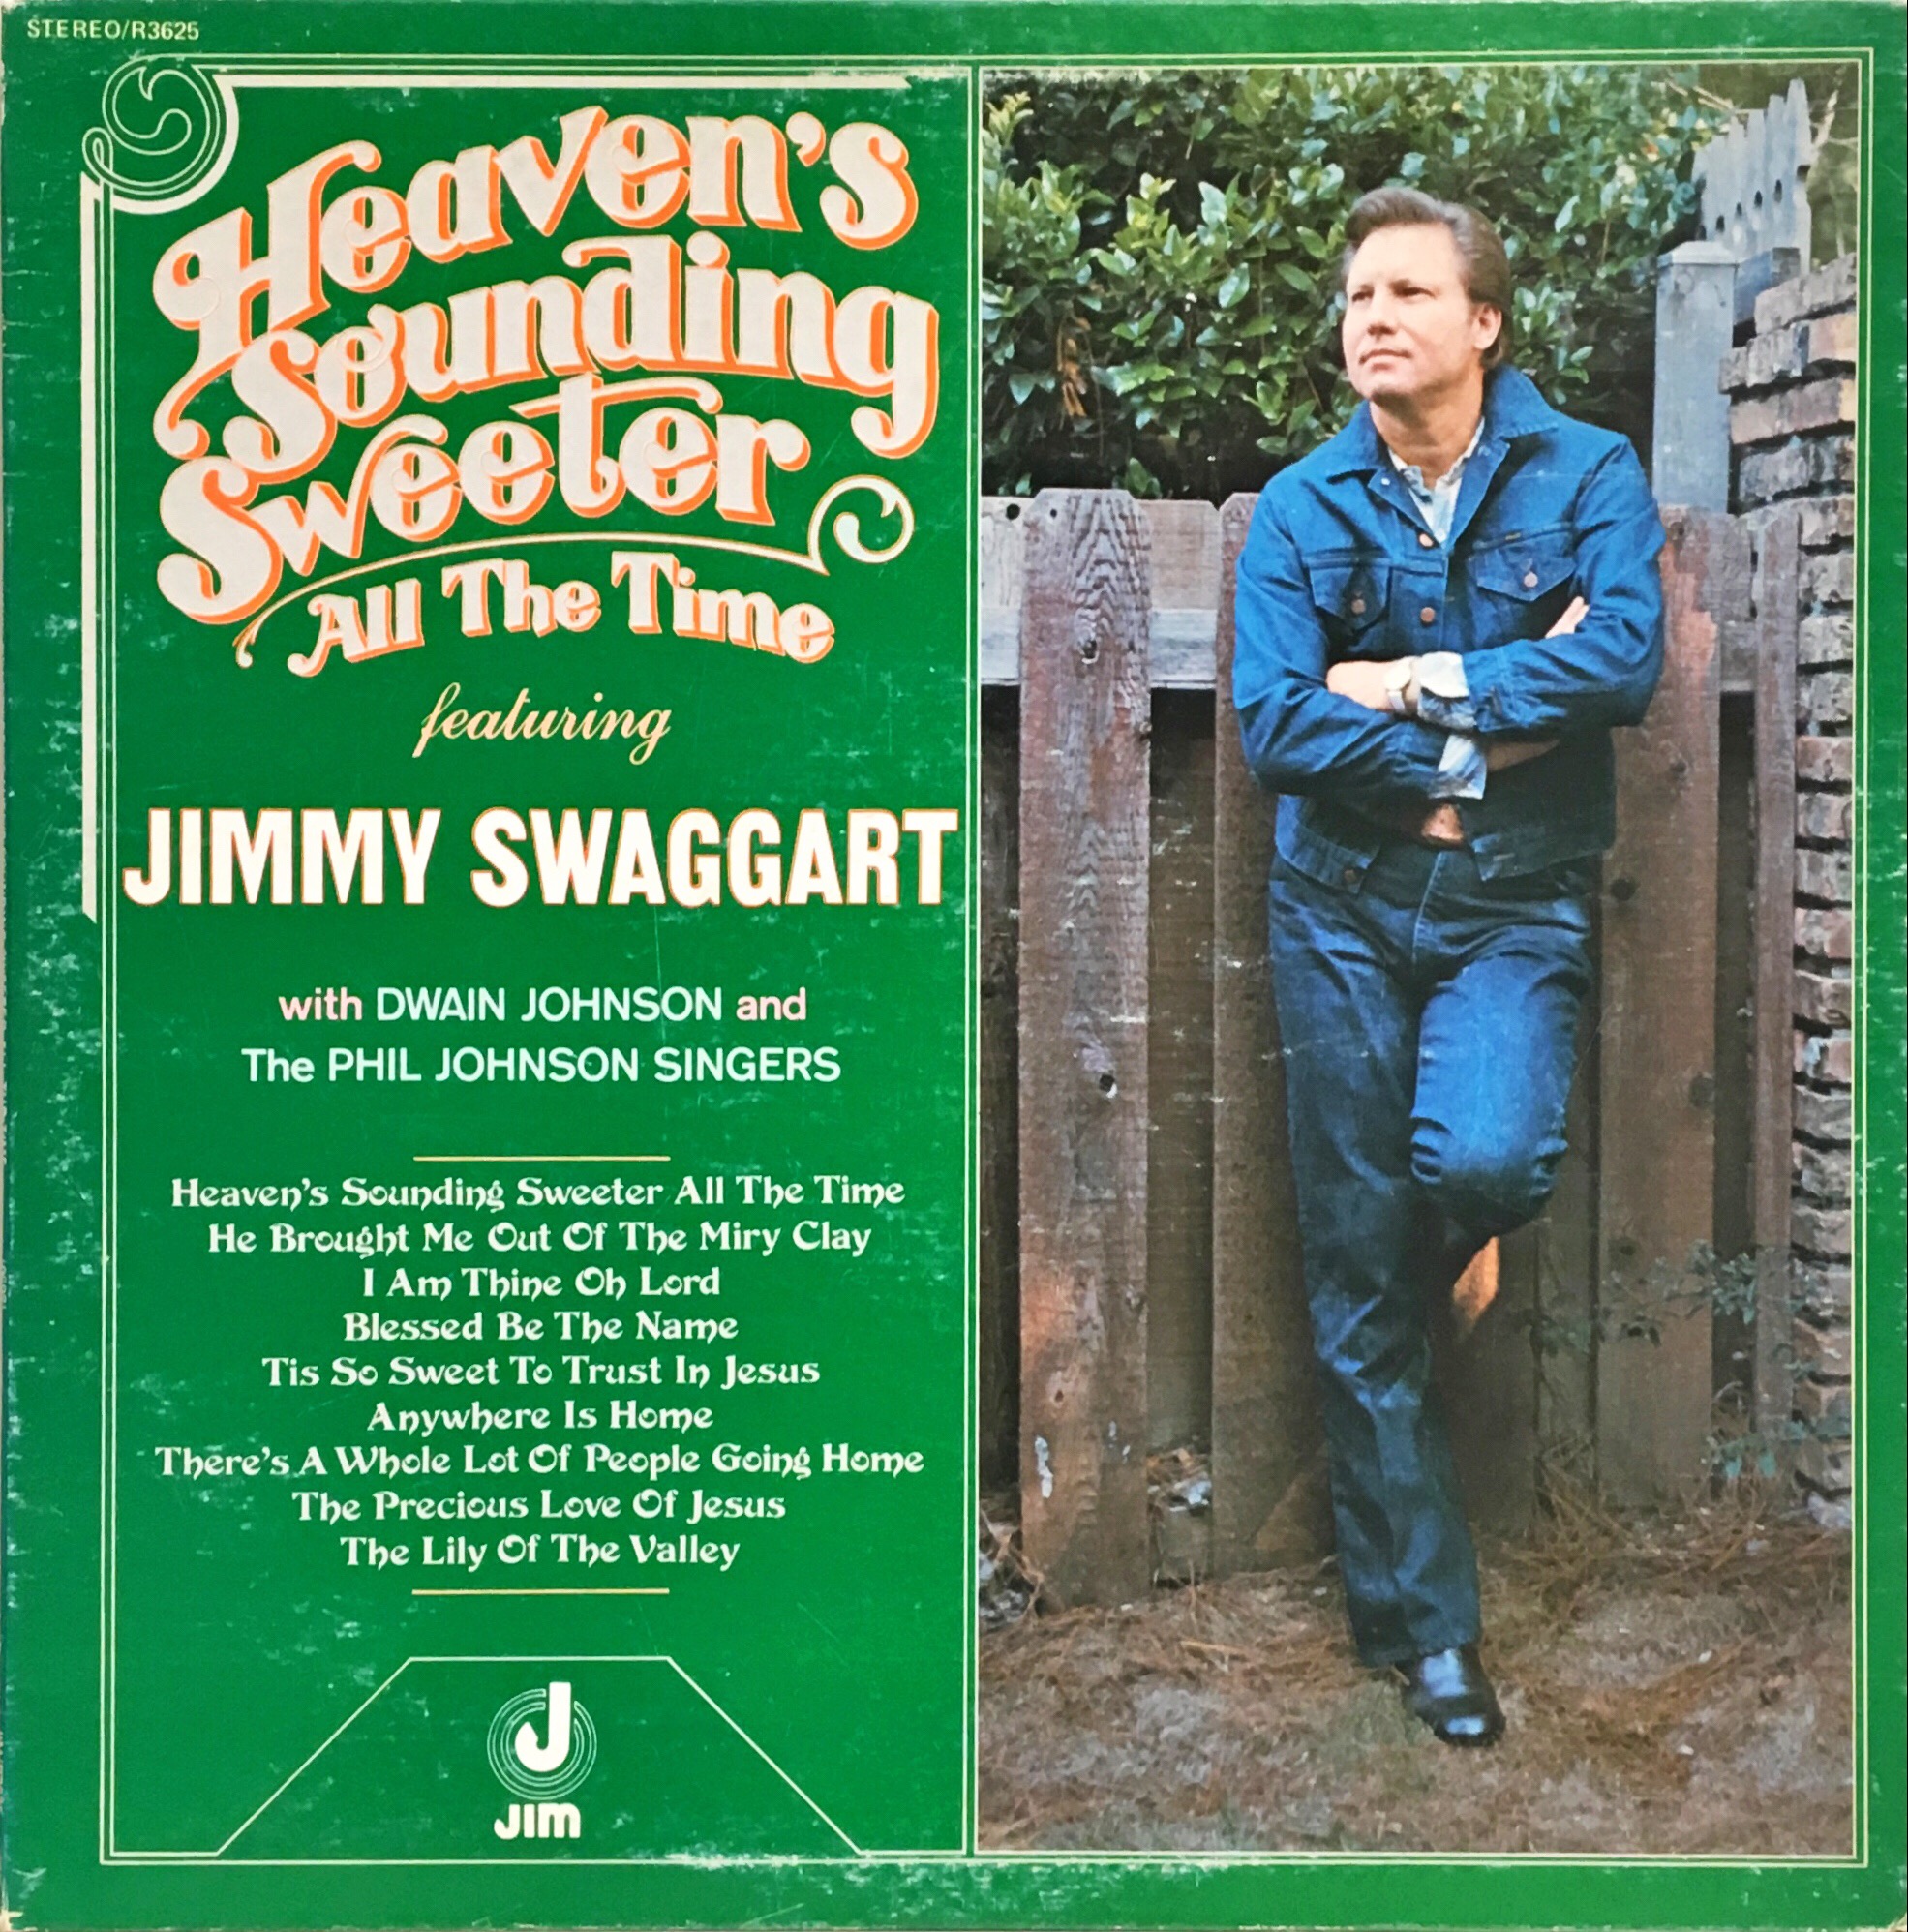 Pictures of jimmy swaggart singers